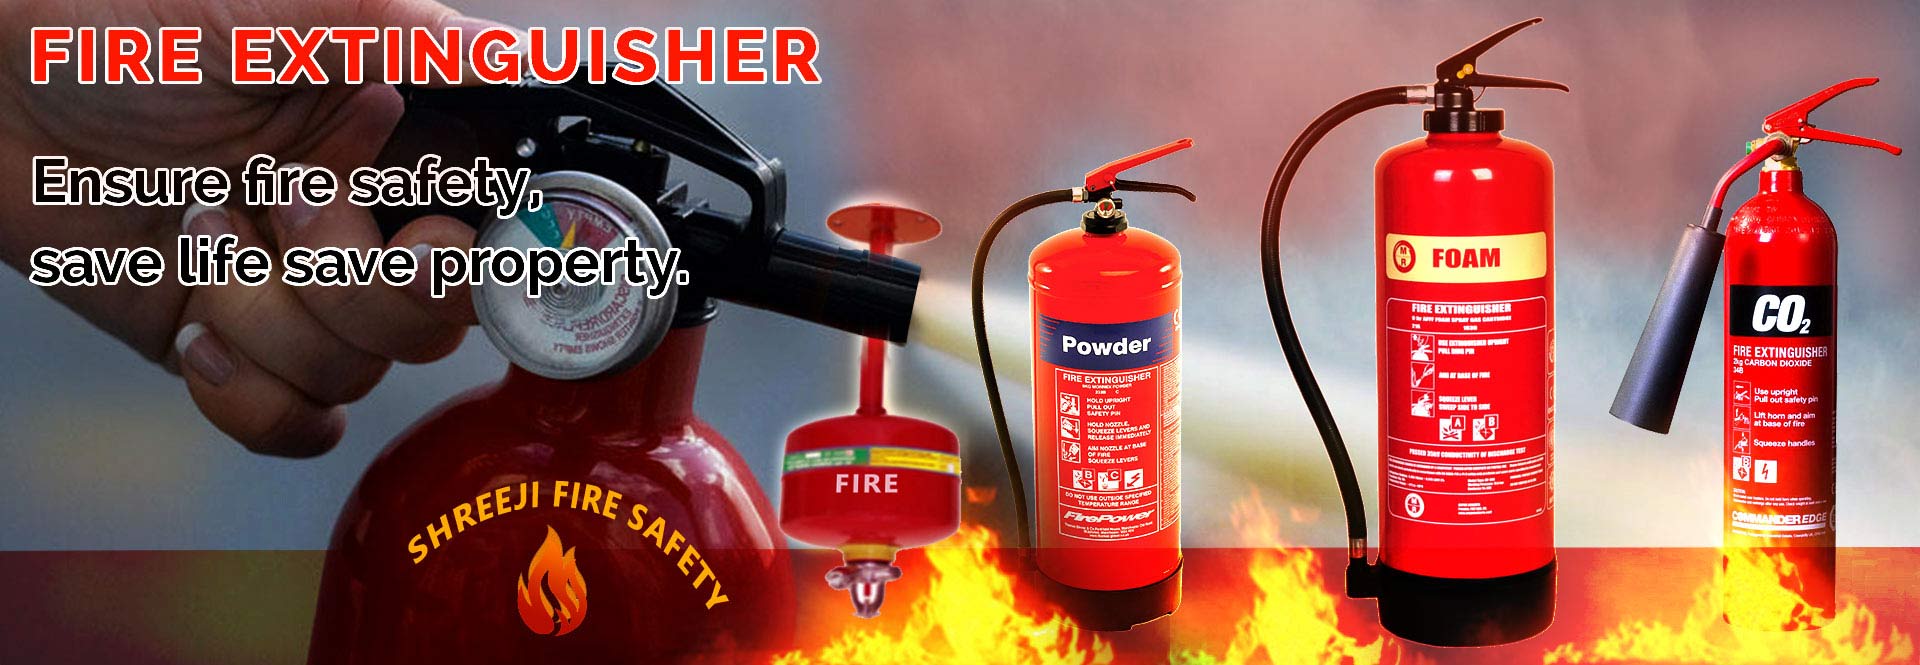 Fire Fight Extinguisher System Manufacturers - Fire Extinguisher Cylinder